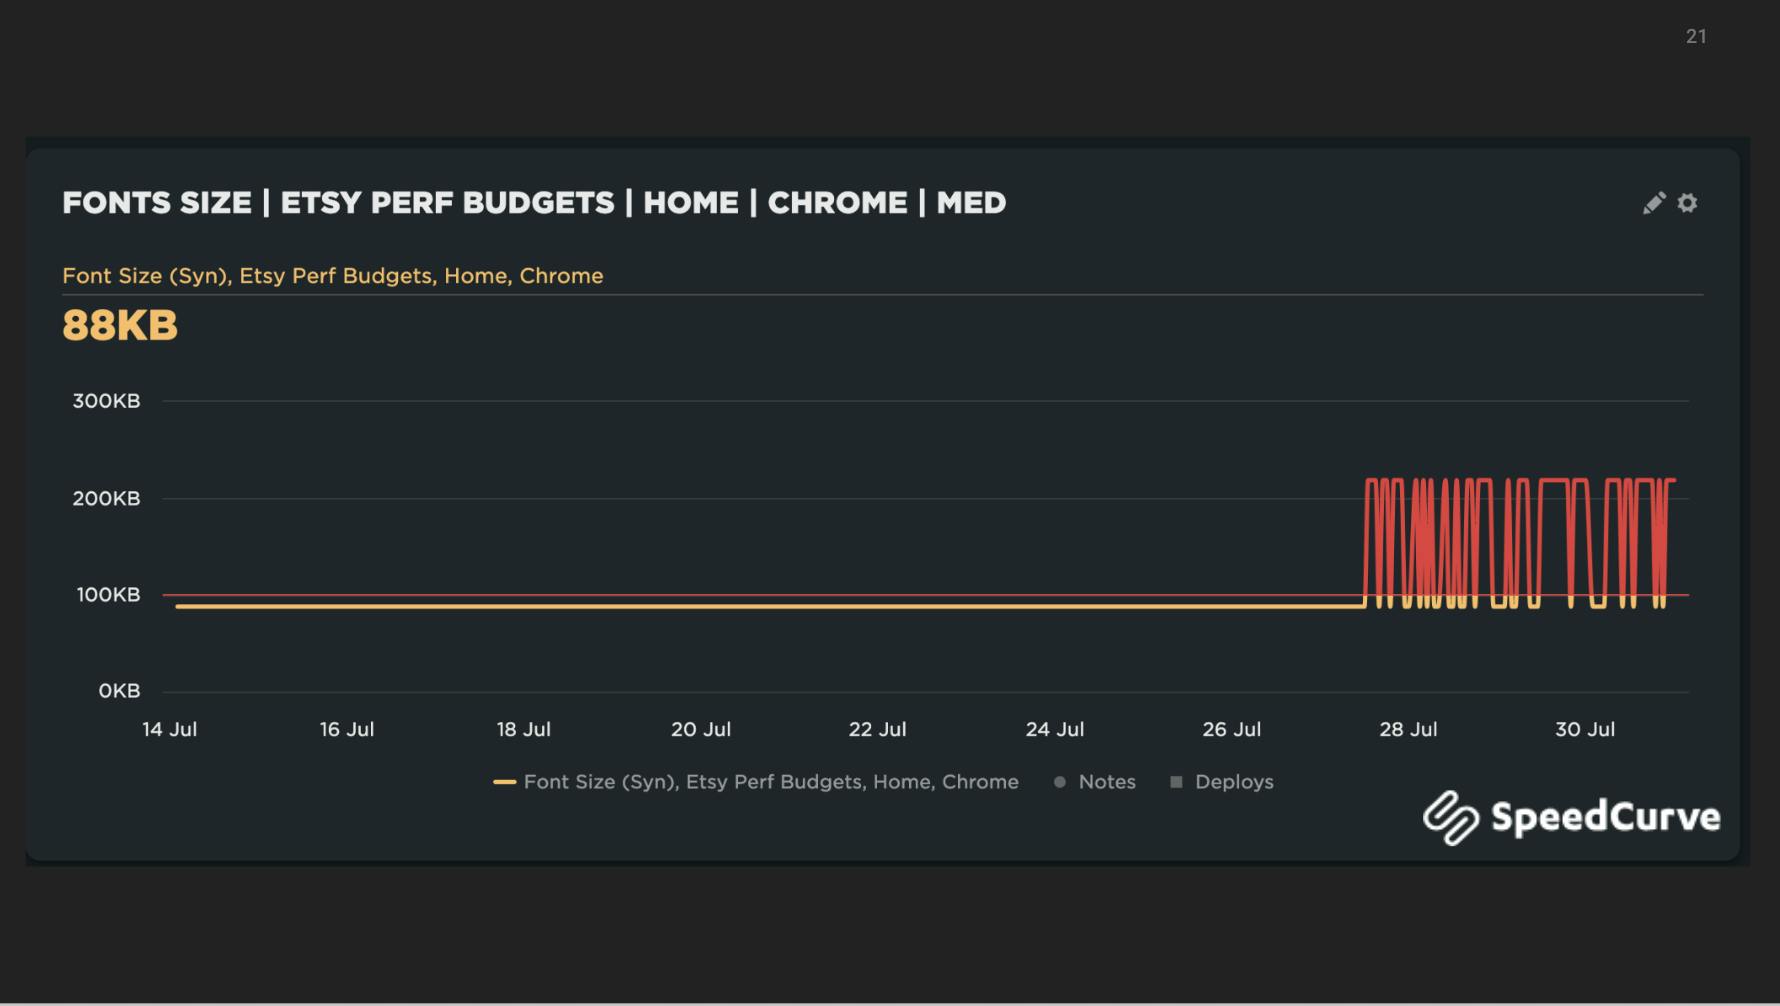 Graph showing a performance budget for fonts being exceeded